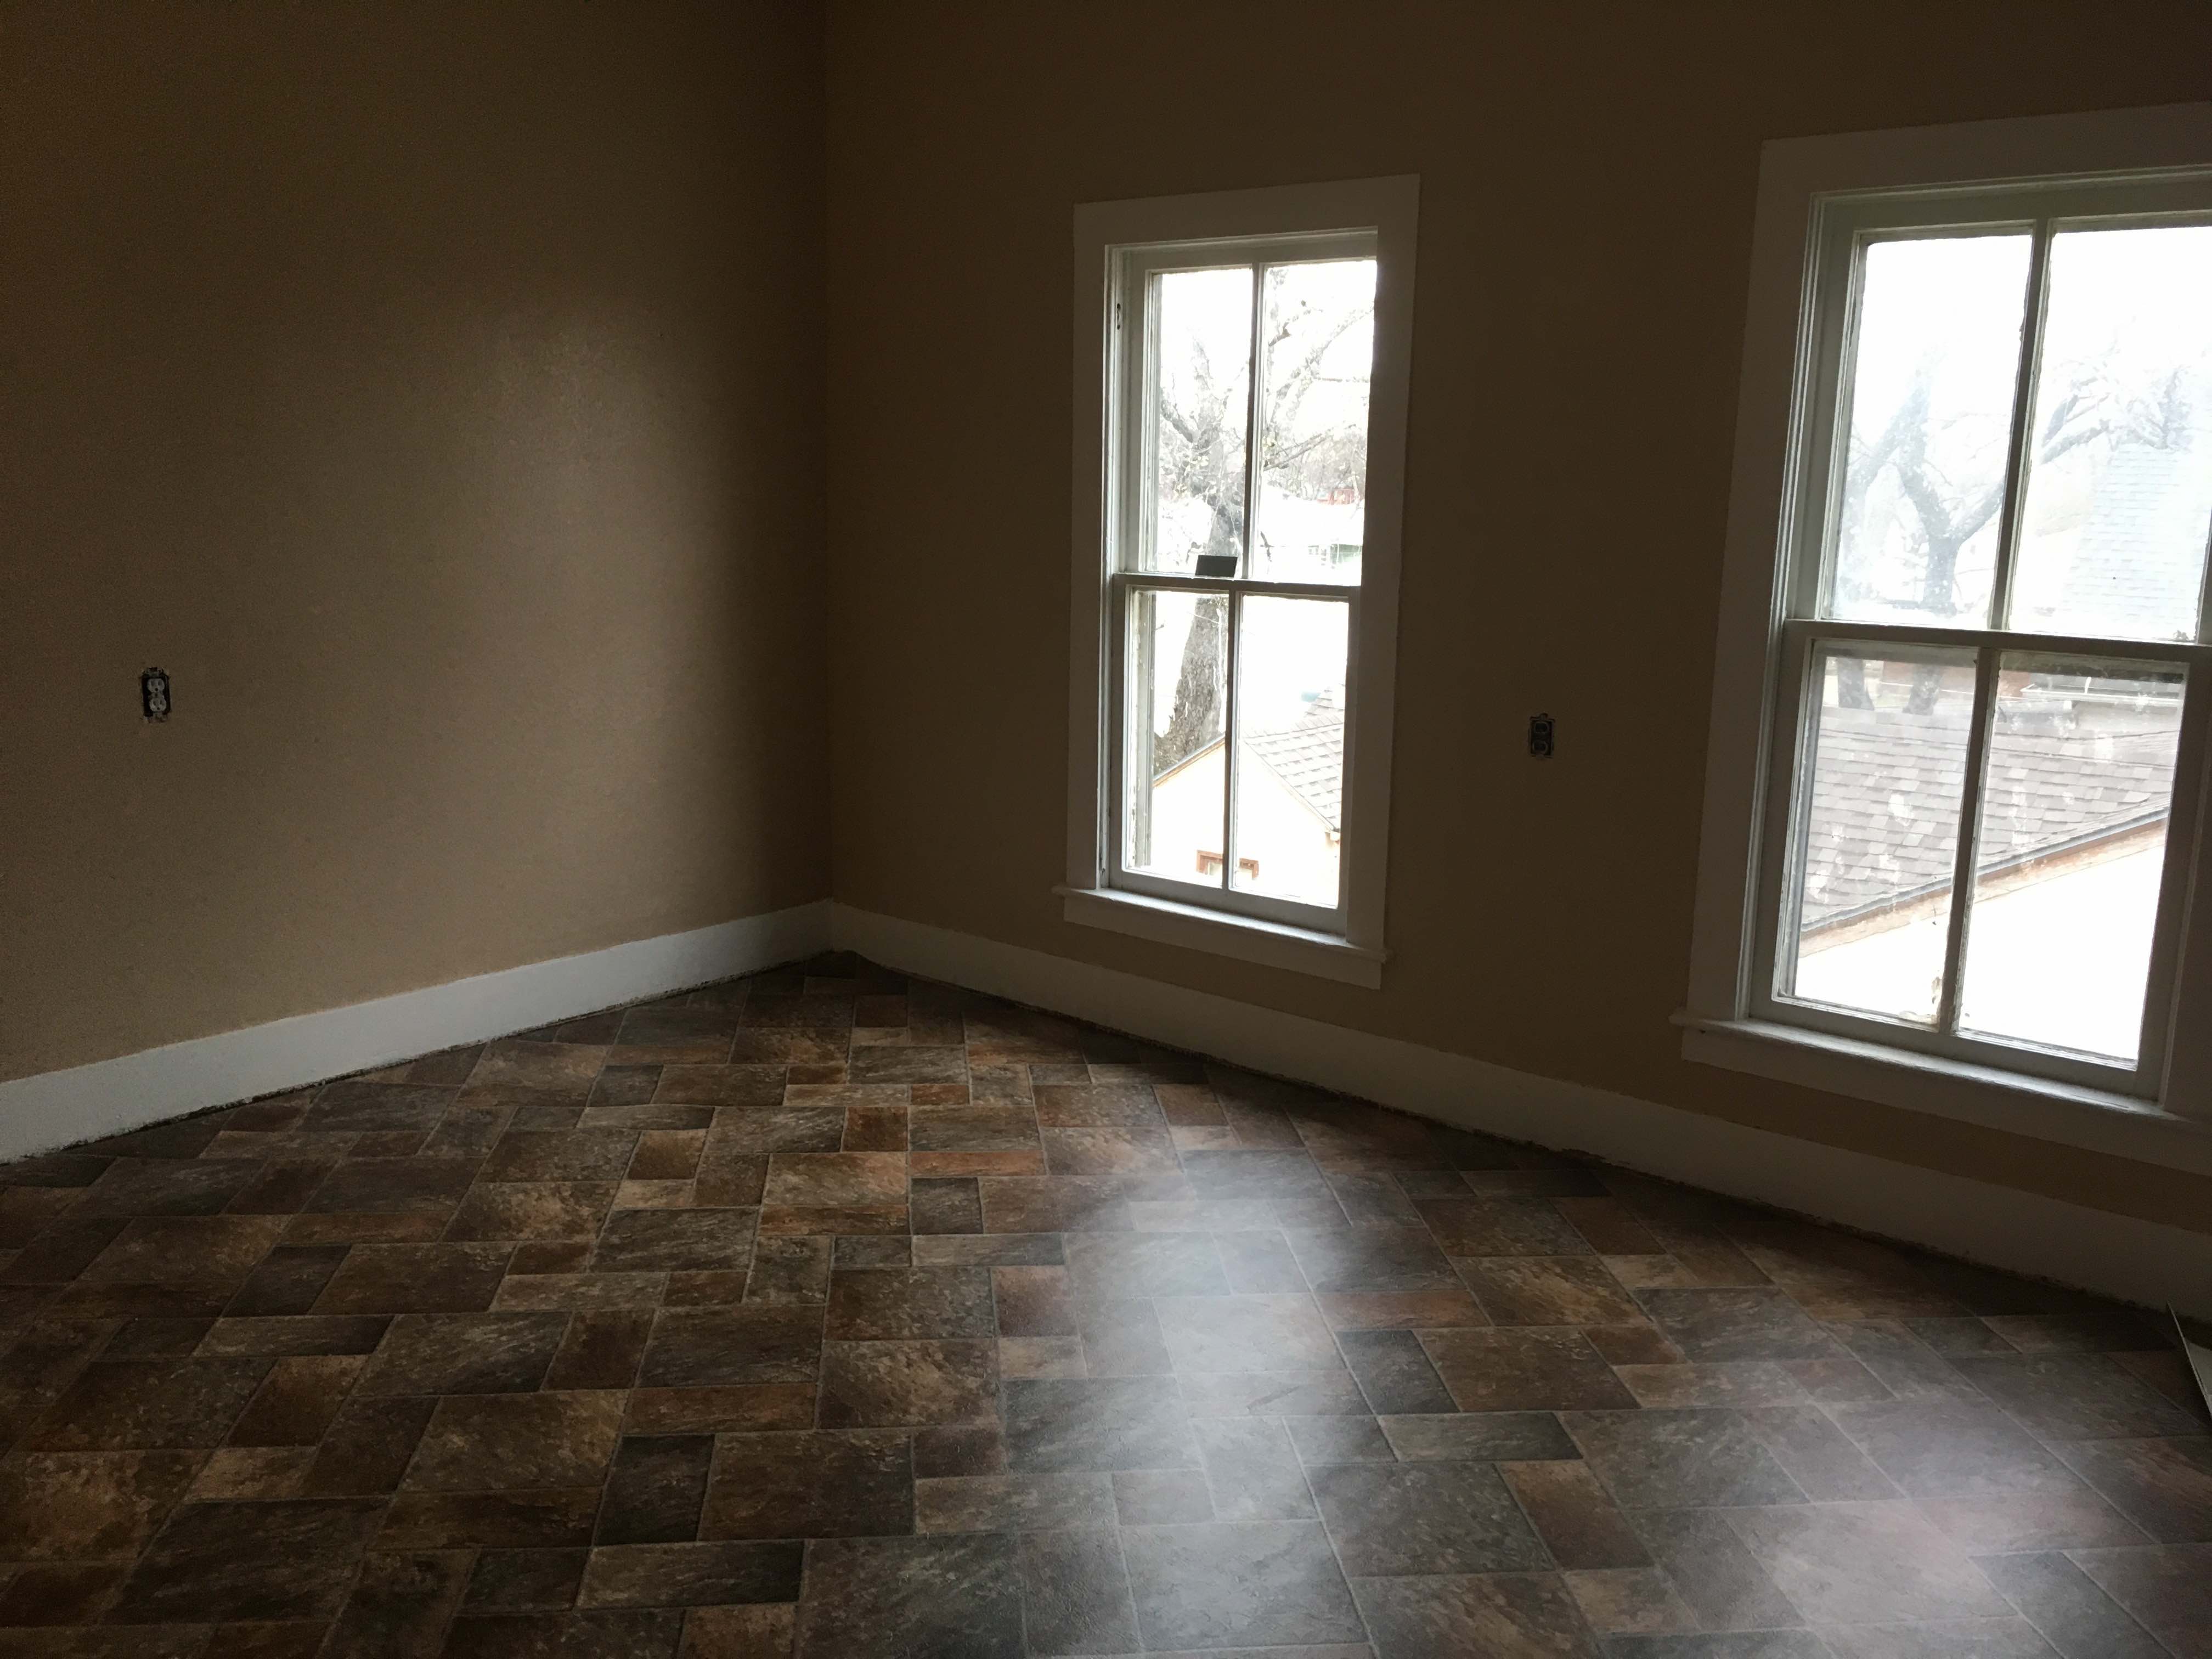 848 S. Main, Fort Scott, Bourbon County, Kansas, United States 66701, 1 Bedroom Bedrooms, ,1 BathroomBathrooms,Apartment,For Rent,S. Main,2,1007